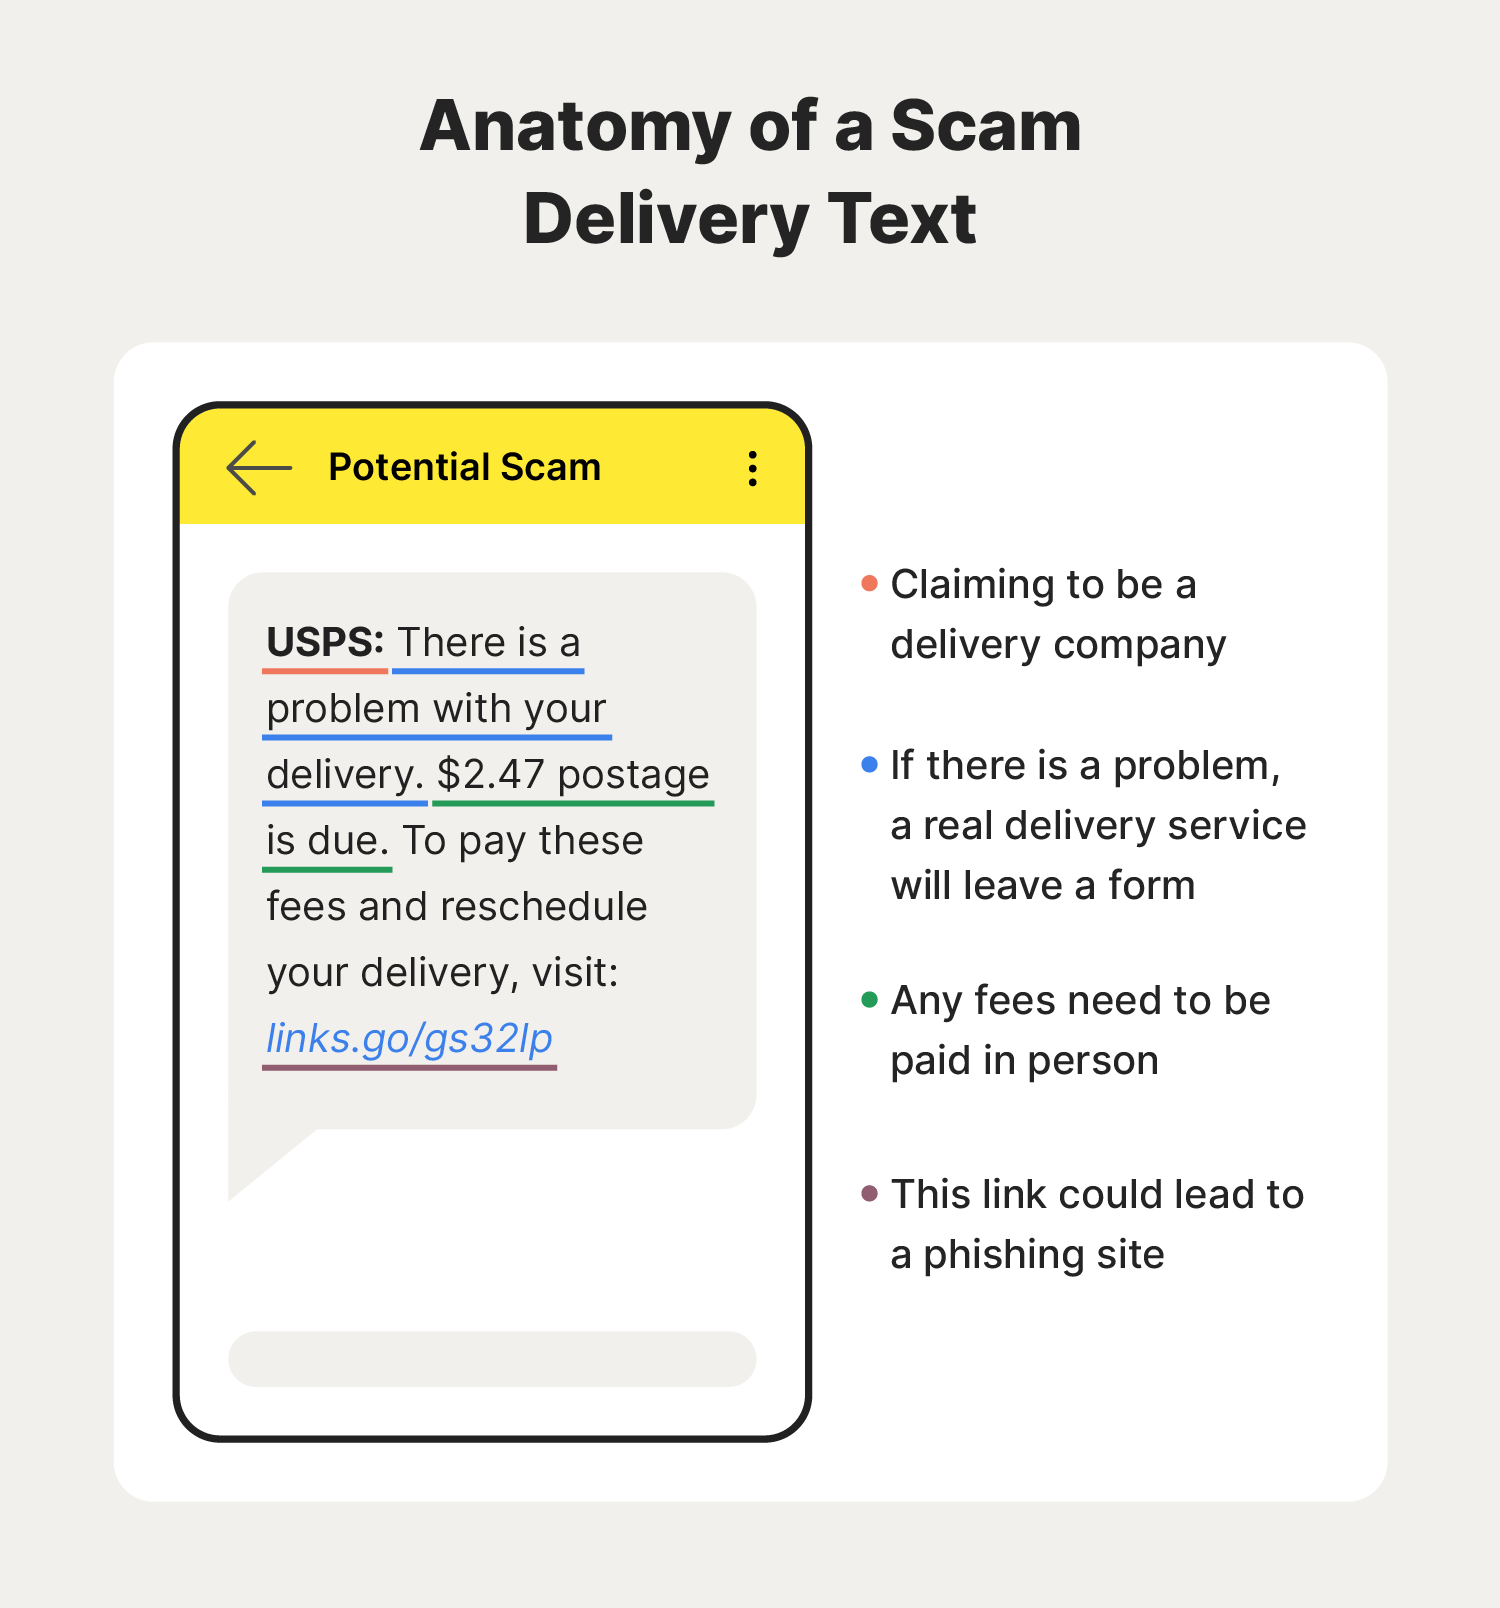 Illustrated example of a scam delivery text, how they work, and the consequences of clicking links in them.